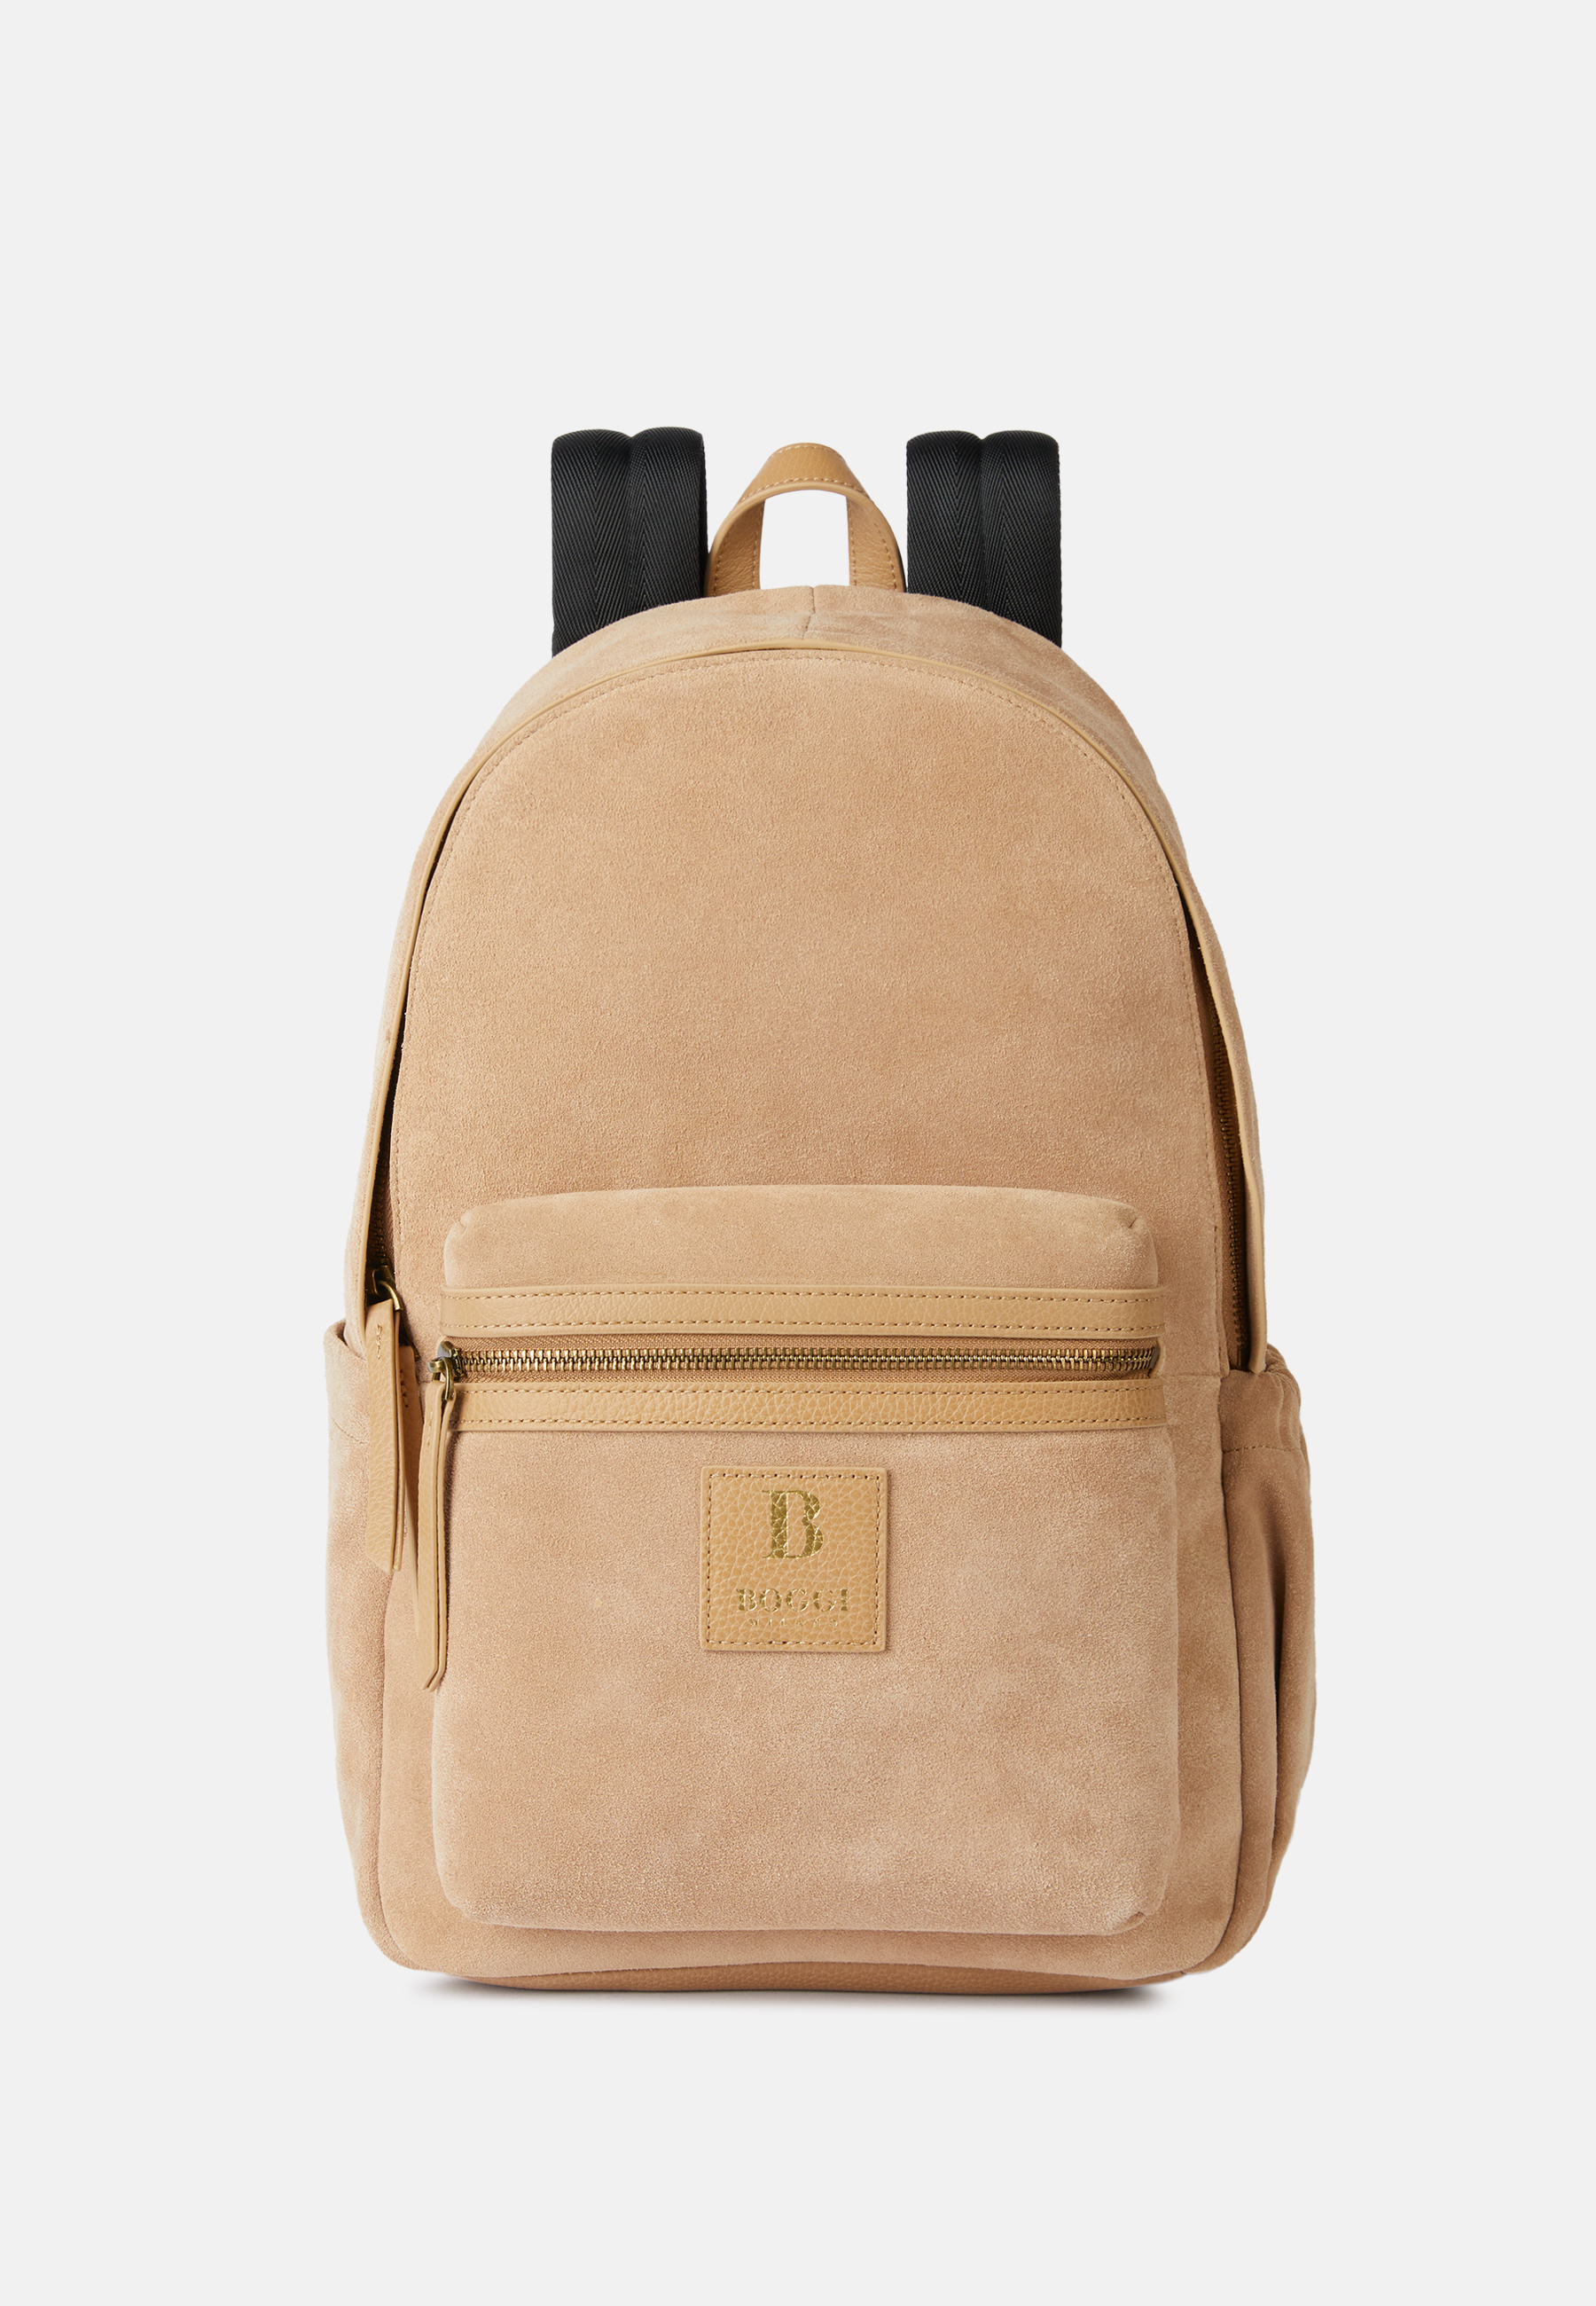 Paul Smith - Leather and Suede Backpack Paul Smith